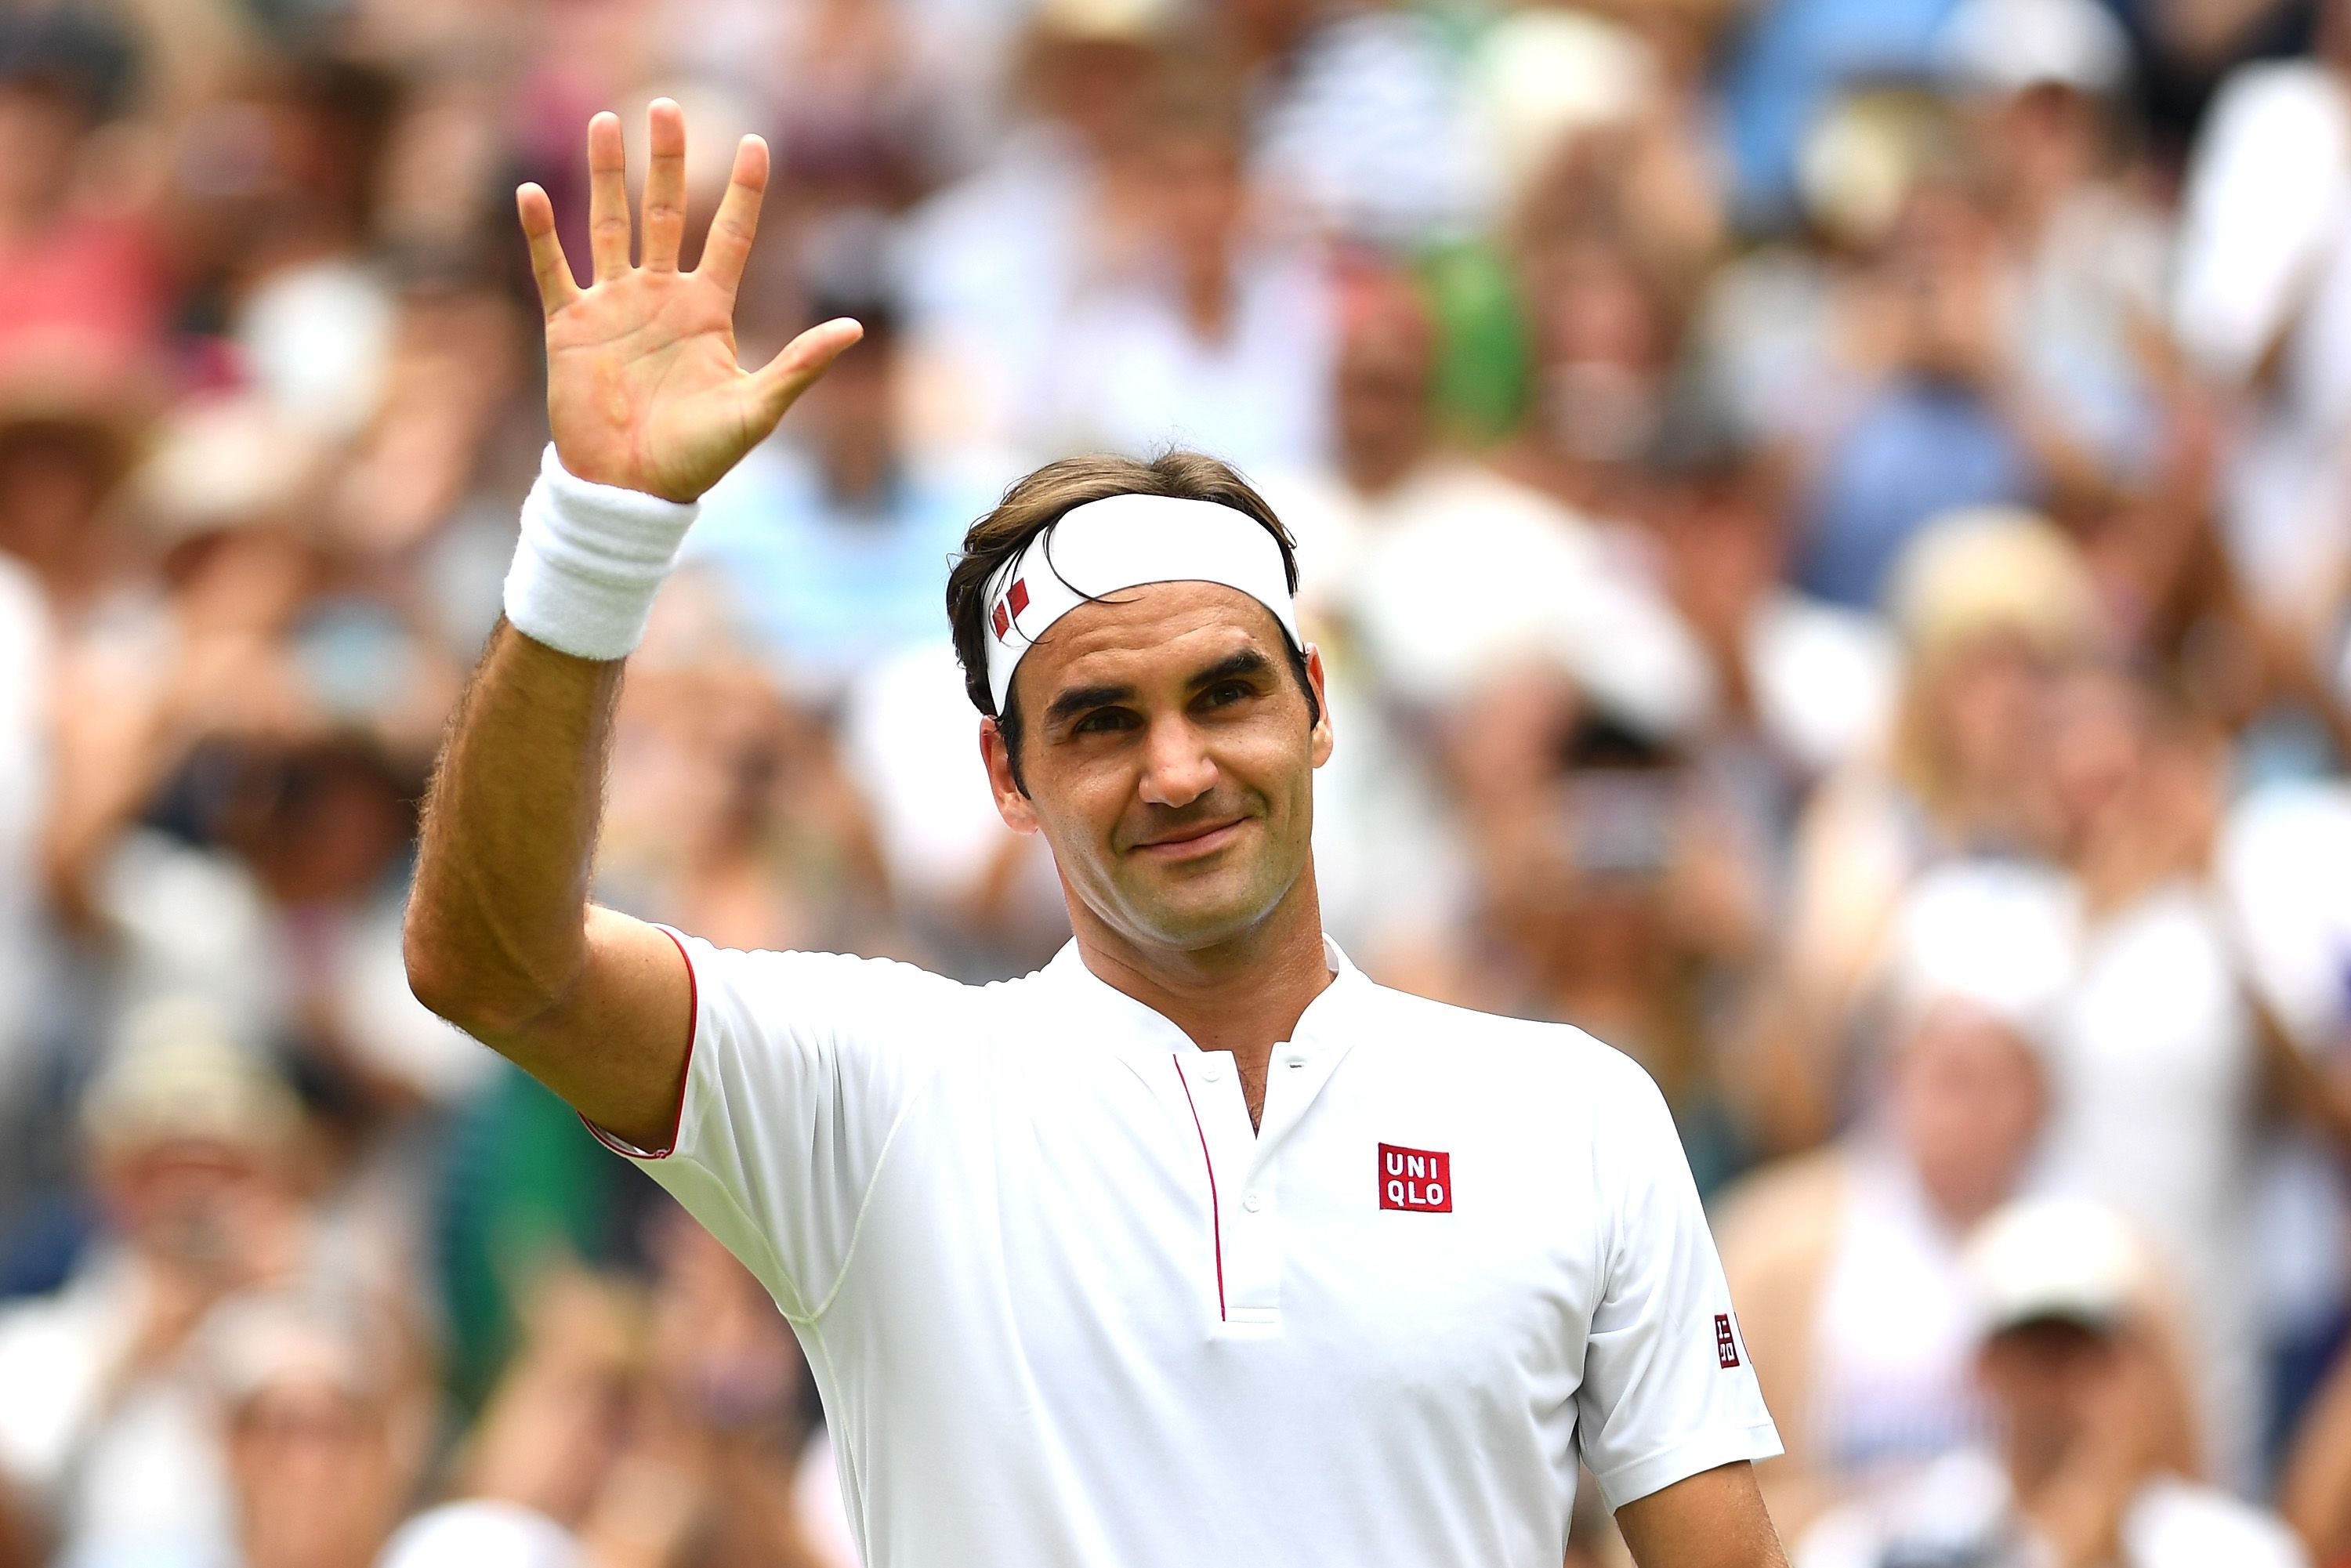 LOOK Dress up like Roger Federer with UNIQLOs new game wear collection